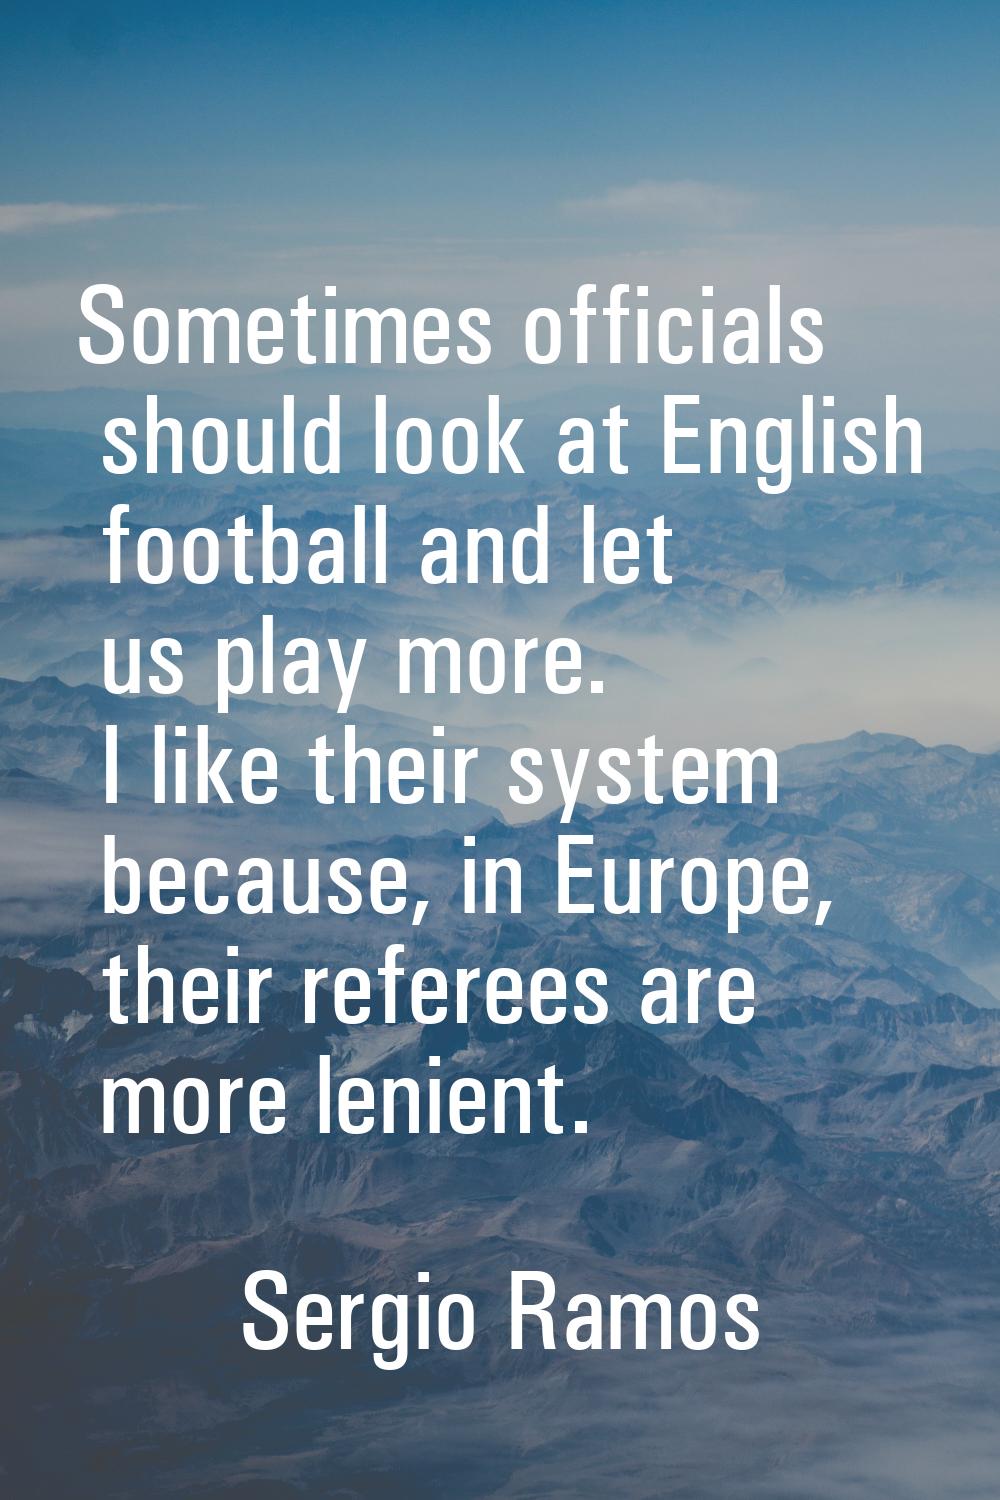 Sometimes officials should look at English football and let us play more. I like their system becau